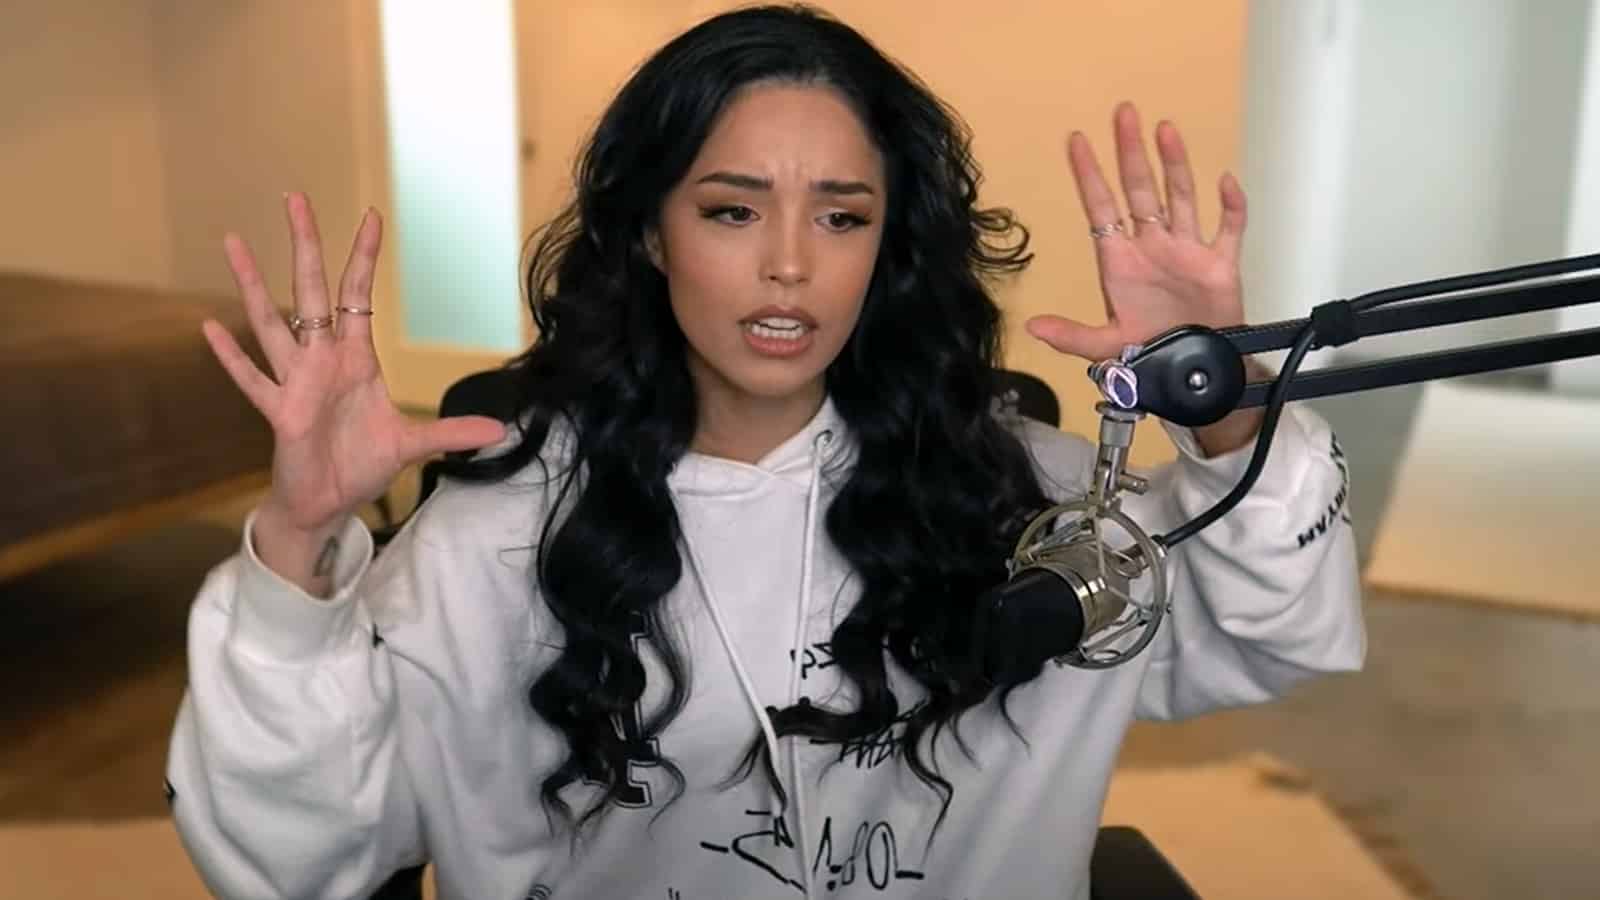 valkyrae-takes-swipe-at-fans-accusing-her-of-overhyping-new-youtube-deal